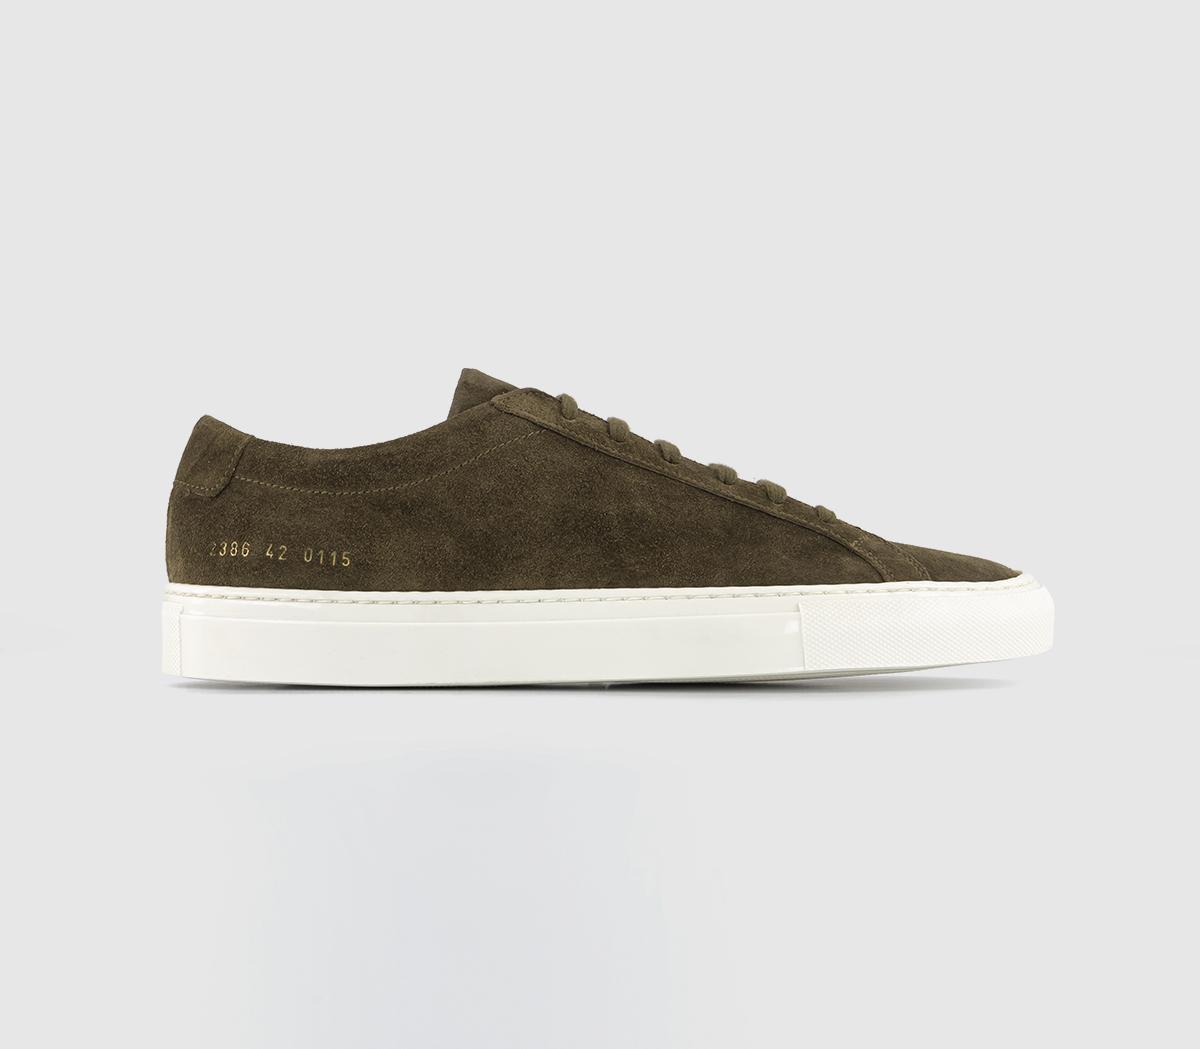 Common ProjectsAchilles Low Trainers Tobacco Suede